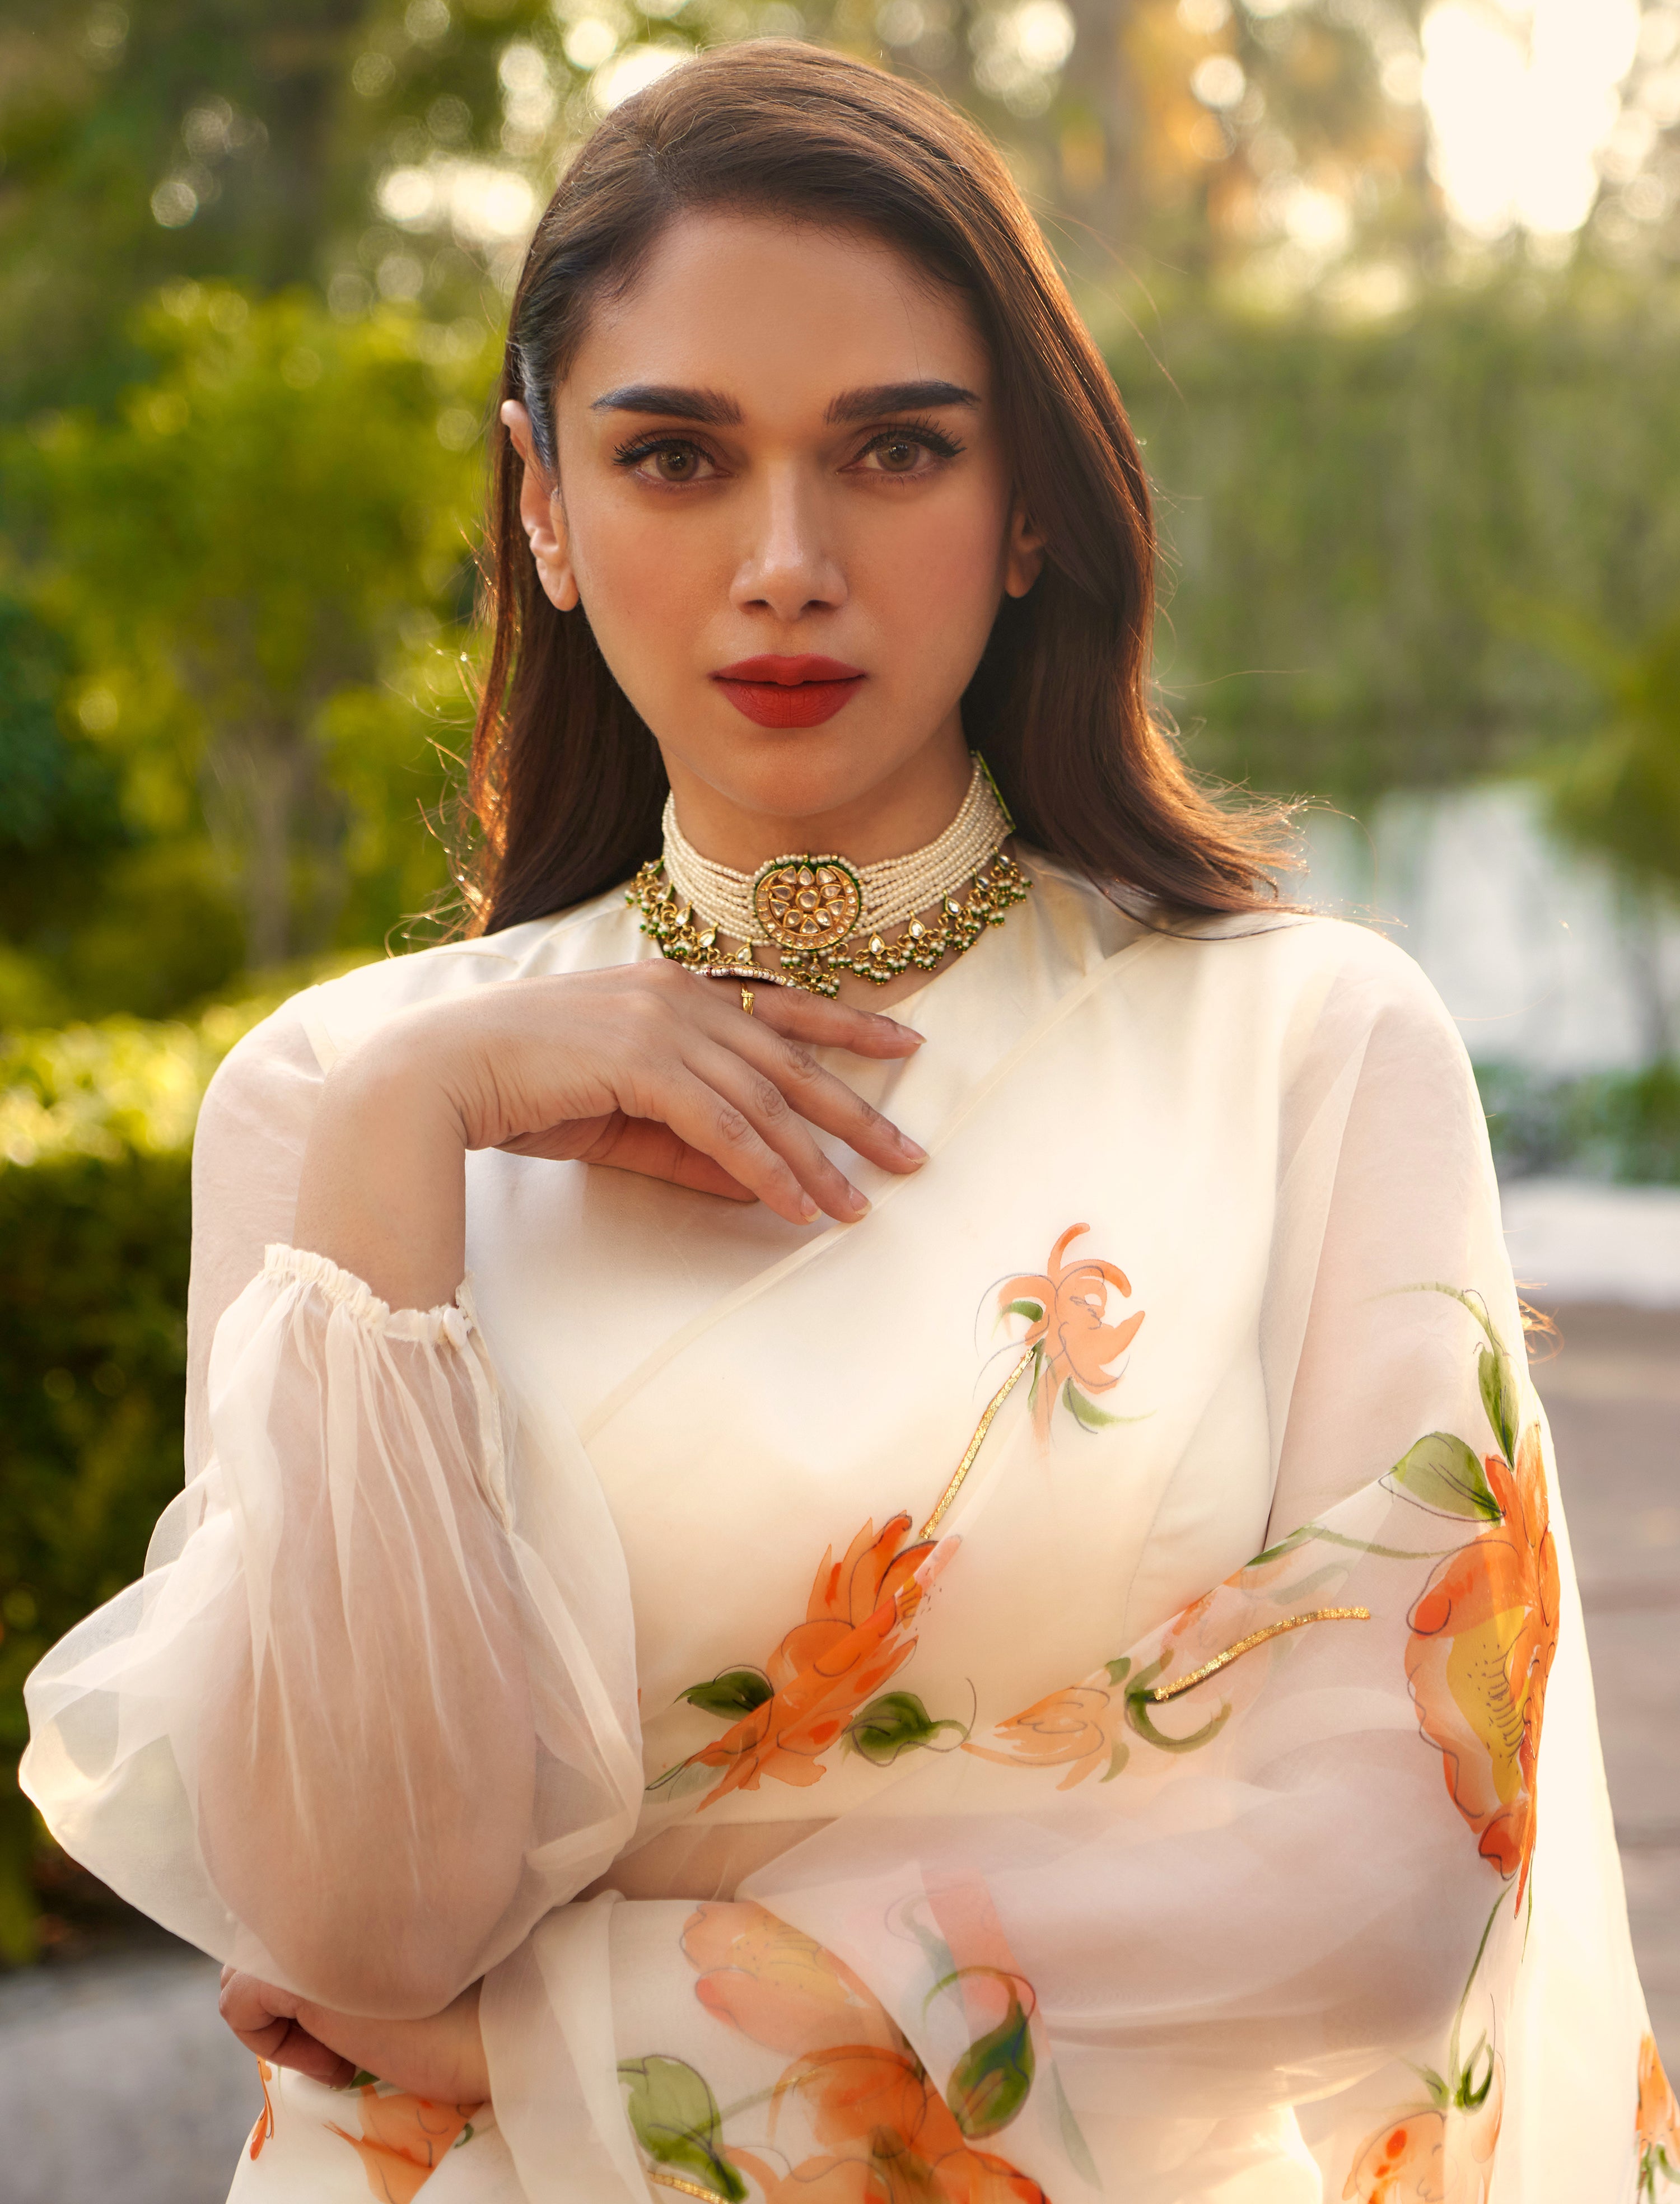 Mirnalini Ravi is a sight to behold in an ivory floral kurta-set!